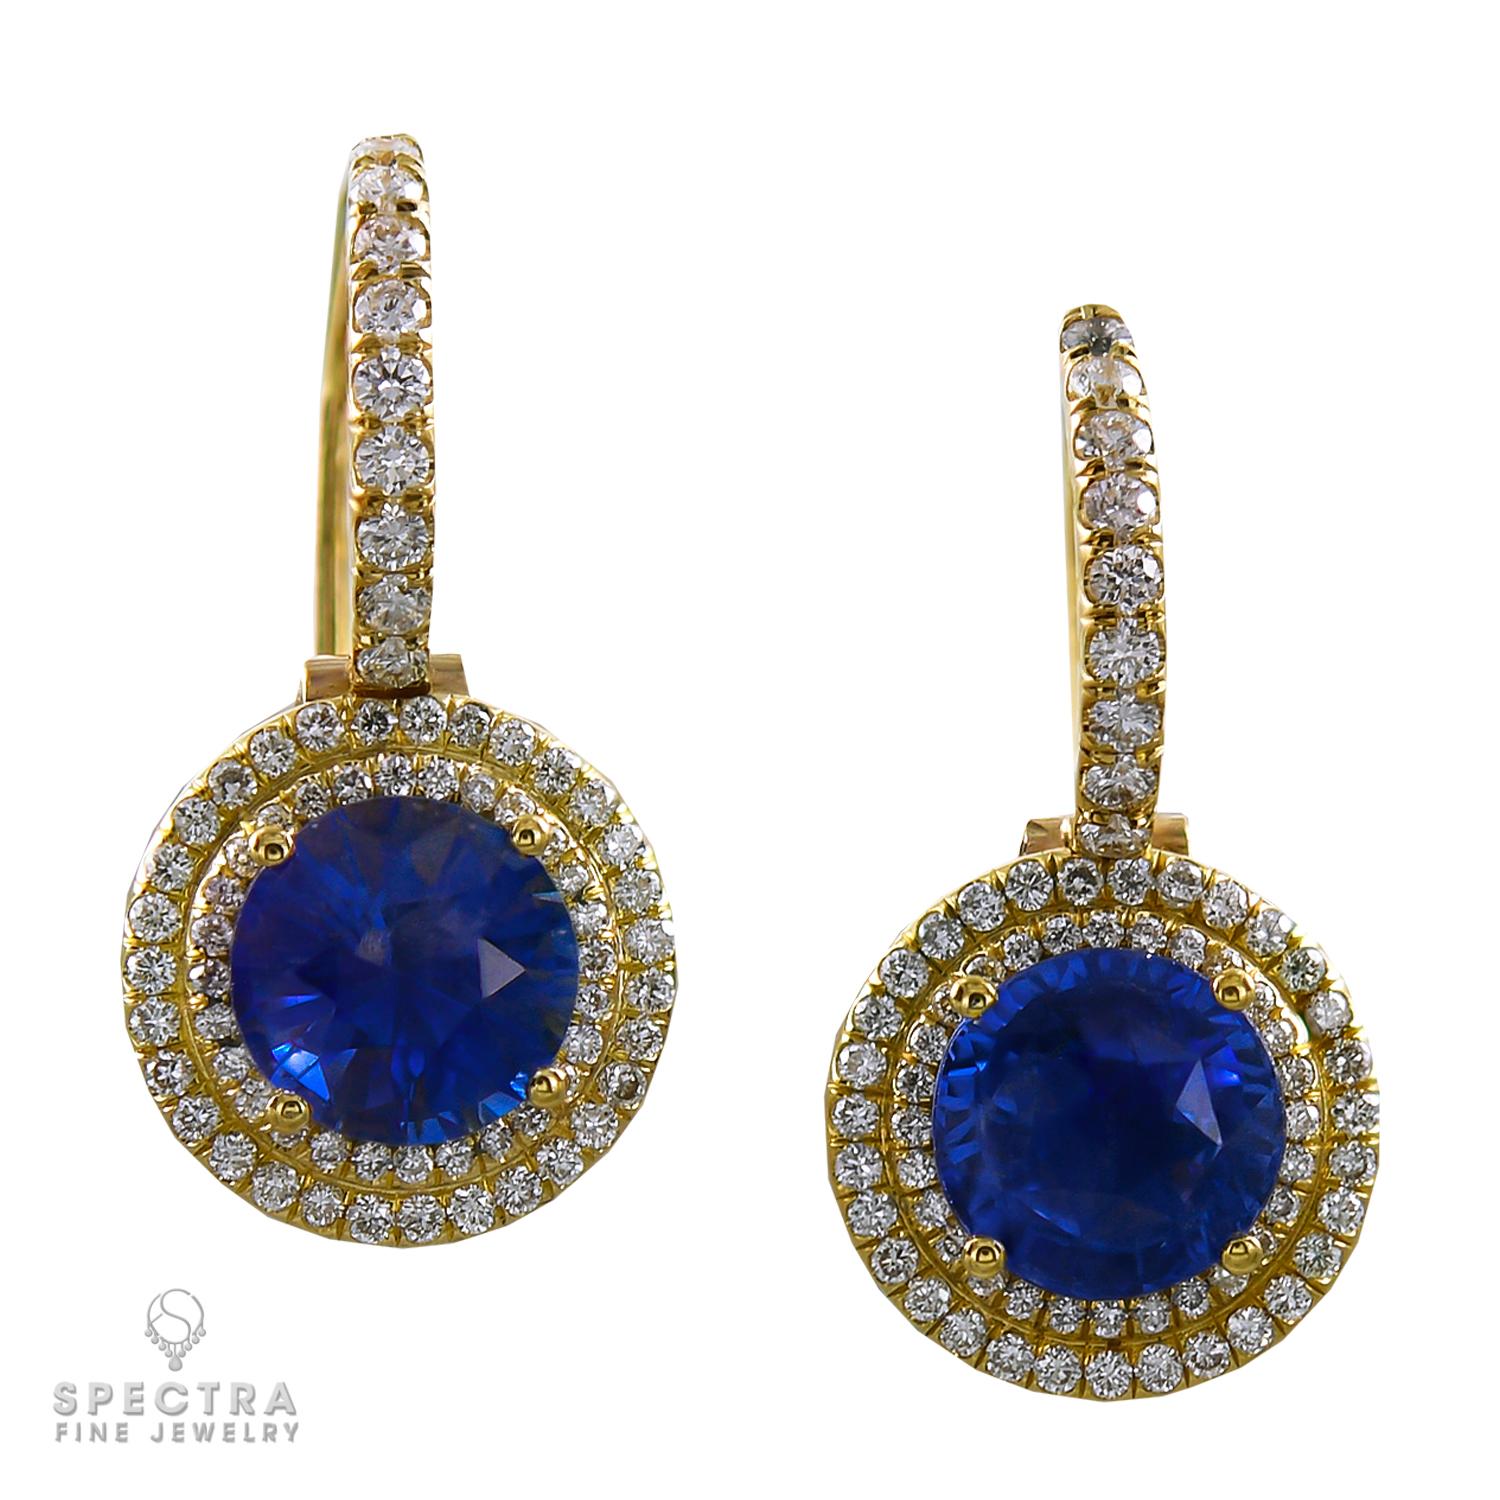 A pair of earrings showcasing two round sapphires weighing 1.78 and 1.94 carats each, set in a double halo of pave diamonds weighing a total of 0.9 carats.
Metal is 18k yellow gold; gross weight 5.1 g.
A matching ring is available.
Message direct